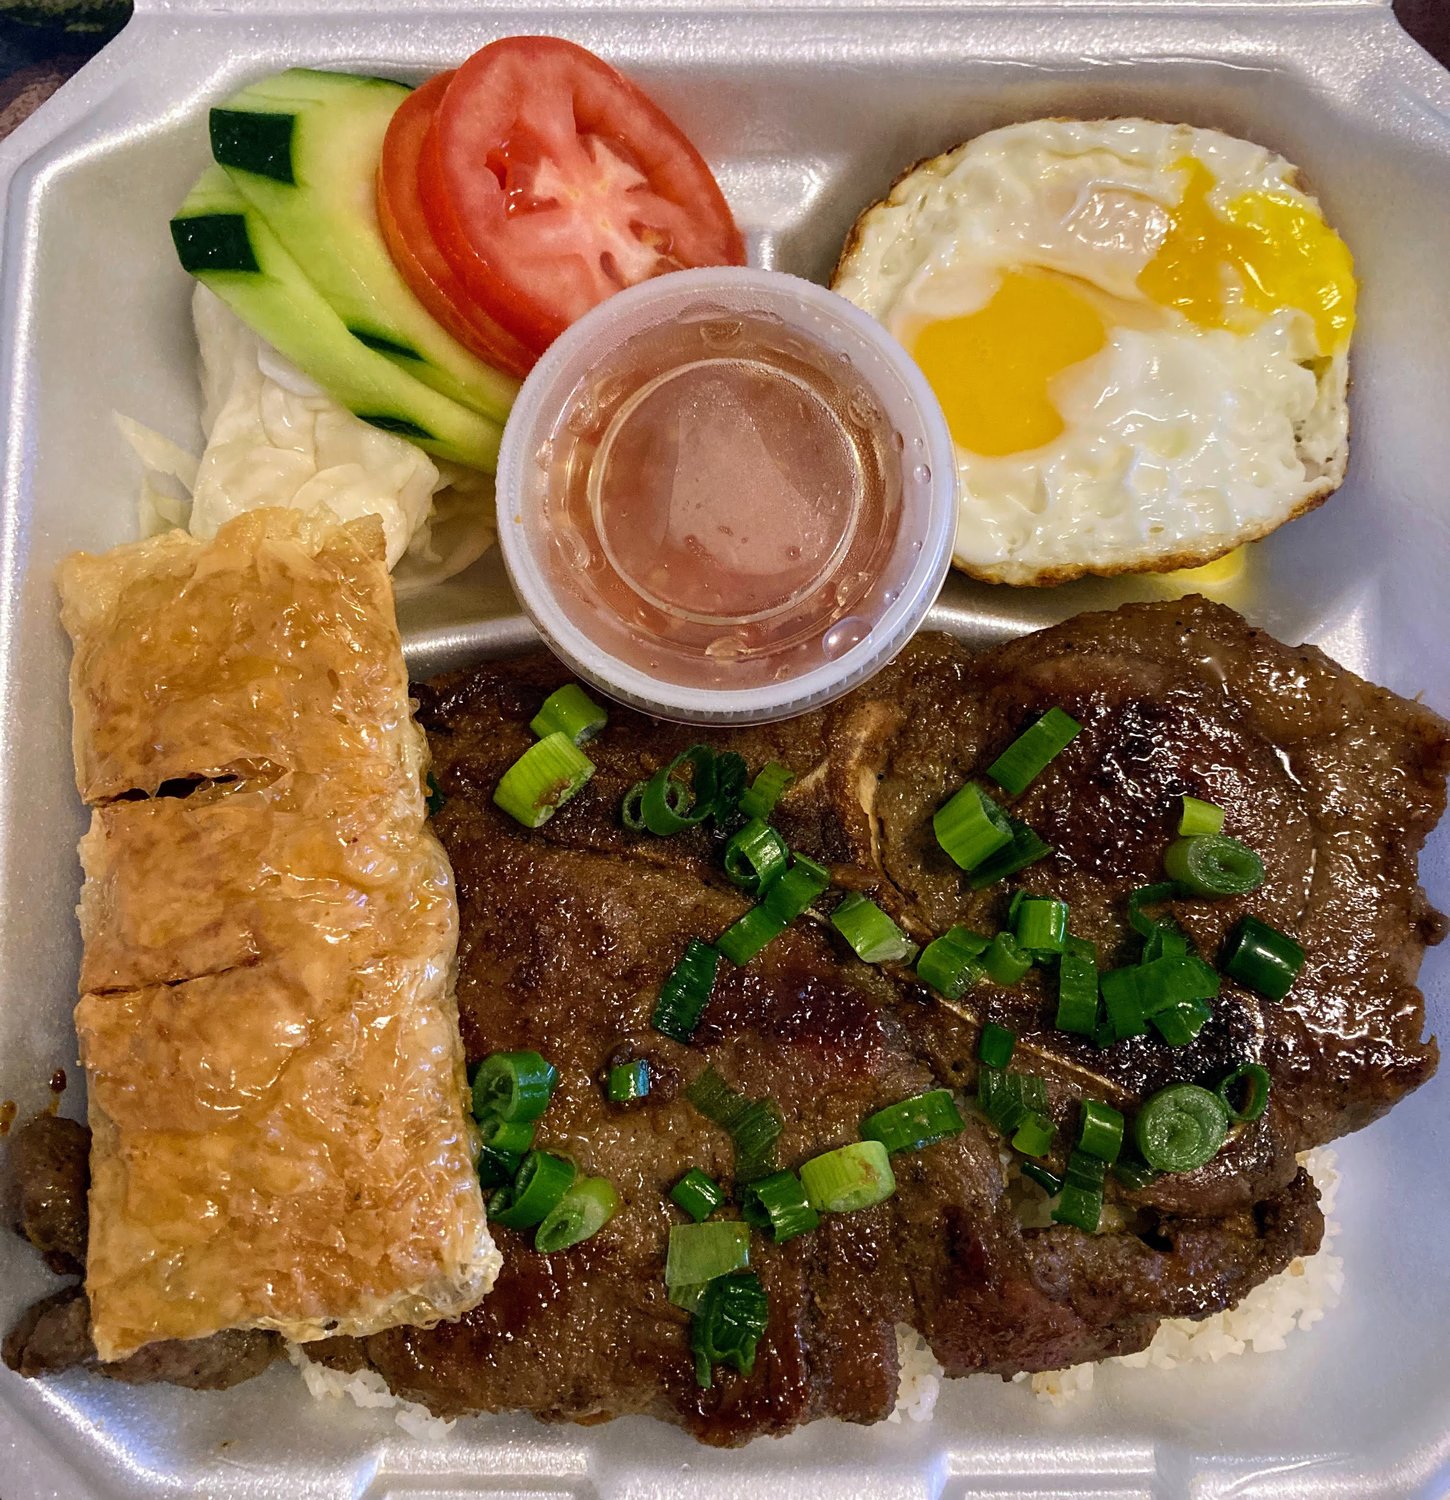 The 777 Rice Special at Okemos’ Pho 777 comes with a sampling of Vietnamese dishes, including grilled pork steak, egg meatloaf, a fried egg and shrimp and pork wrapped in fried tofu skin. Drizzle fish sauce over the top to elevate the already intoxicating flavors.